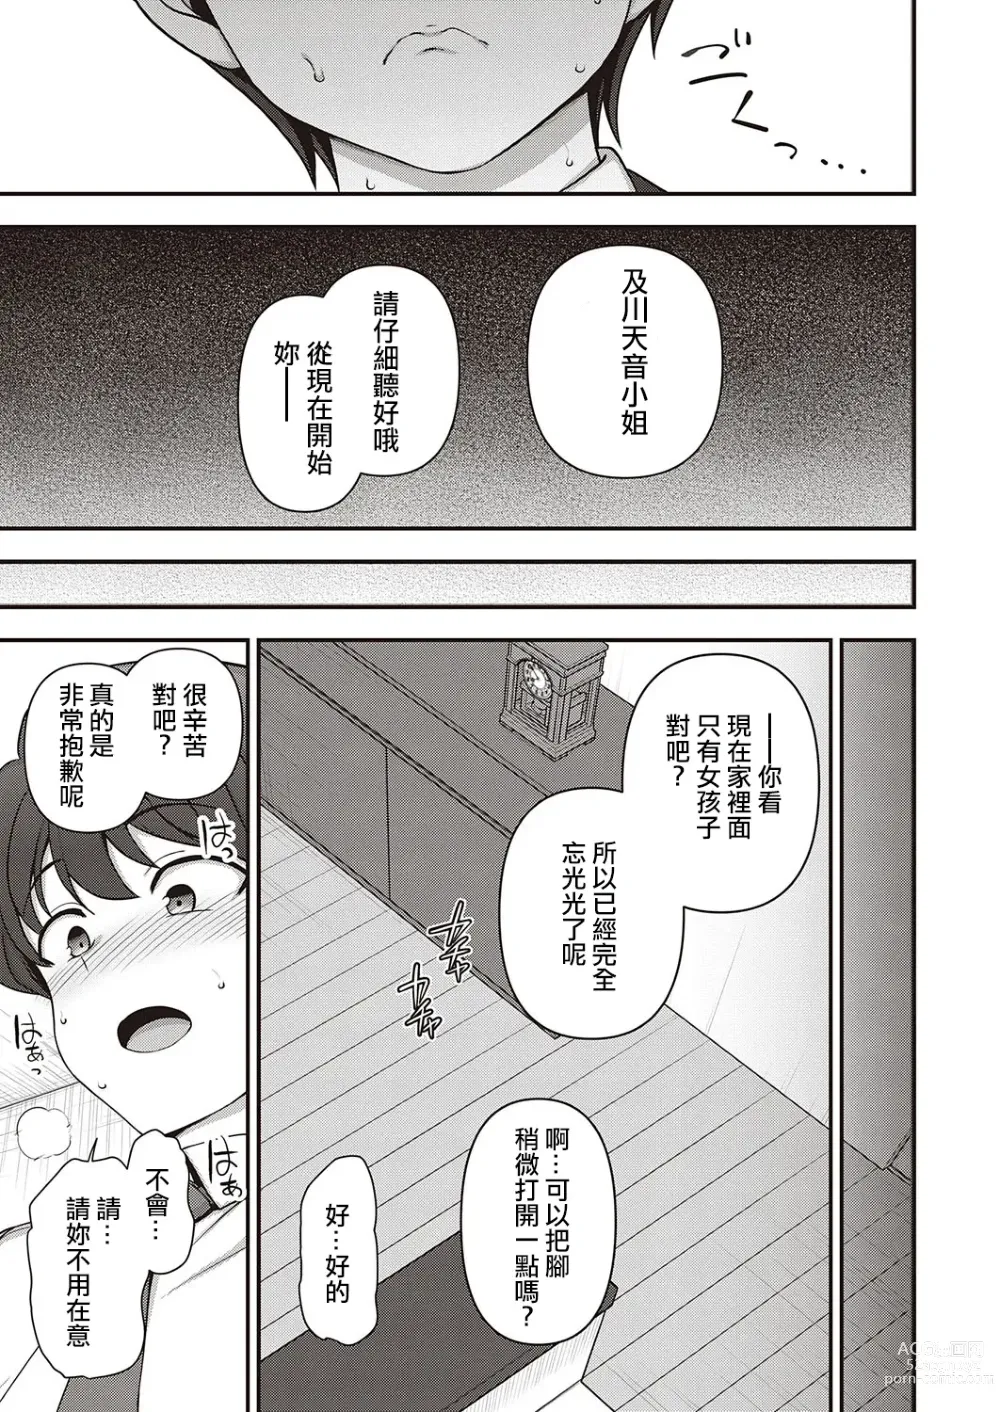 Page 31 of manga FamiCon - Family Control Ch.1-4